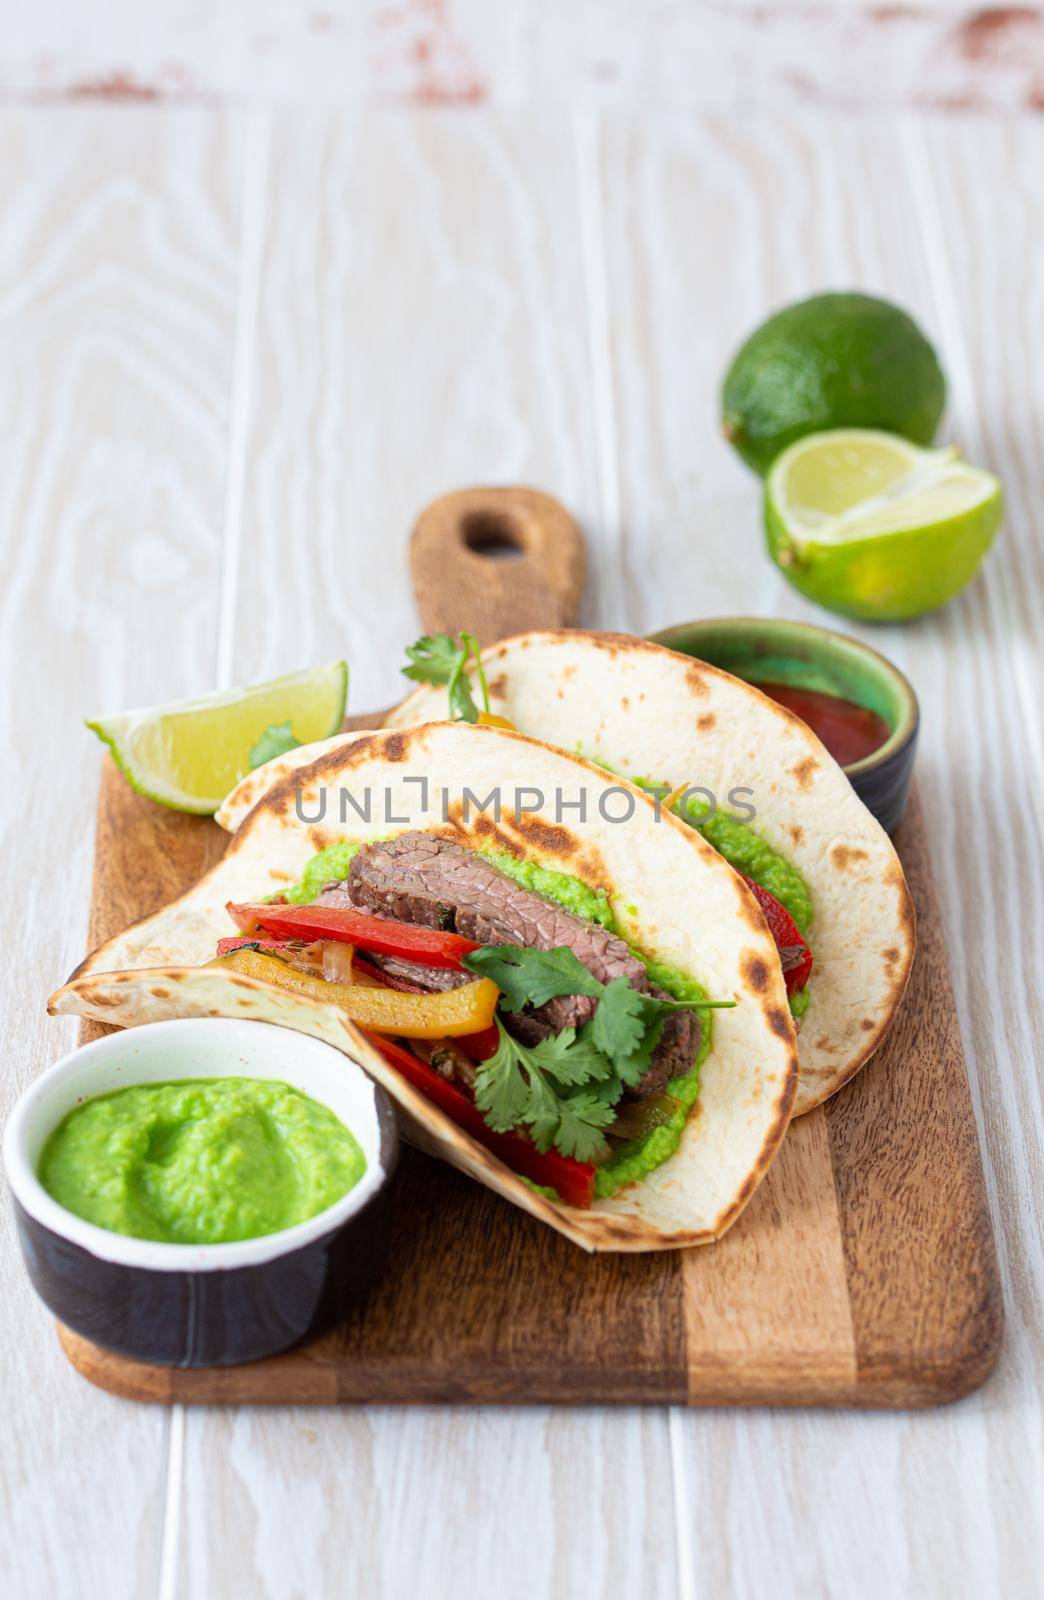 Traditional Mexican dish Beef fajitas tacos served on wooden cutting board with tomato salsa and guacamole on rustic white wooden background from angle view, American Mexican food